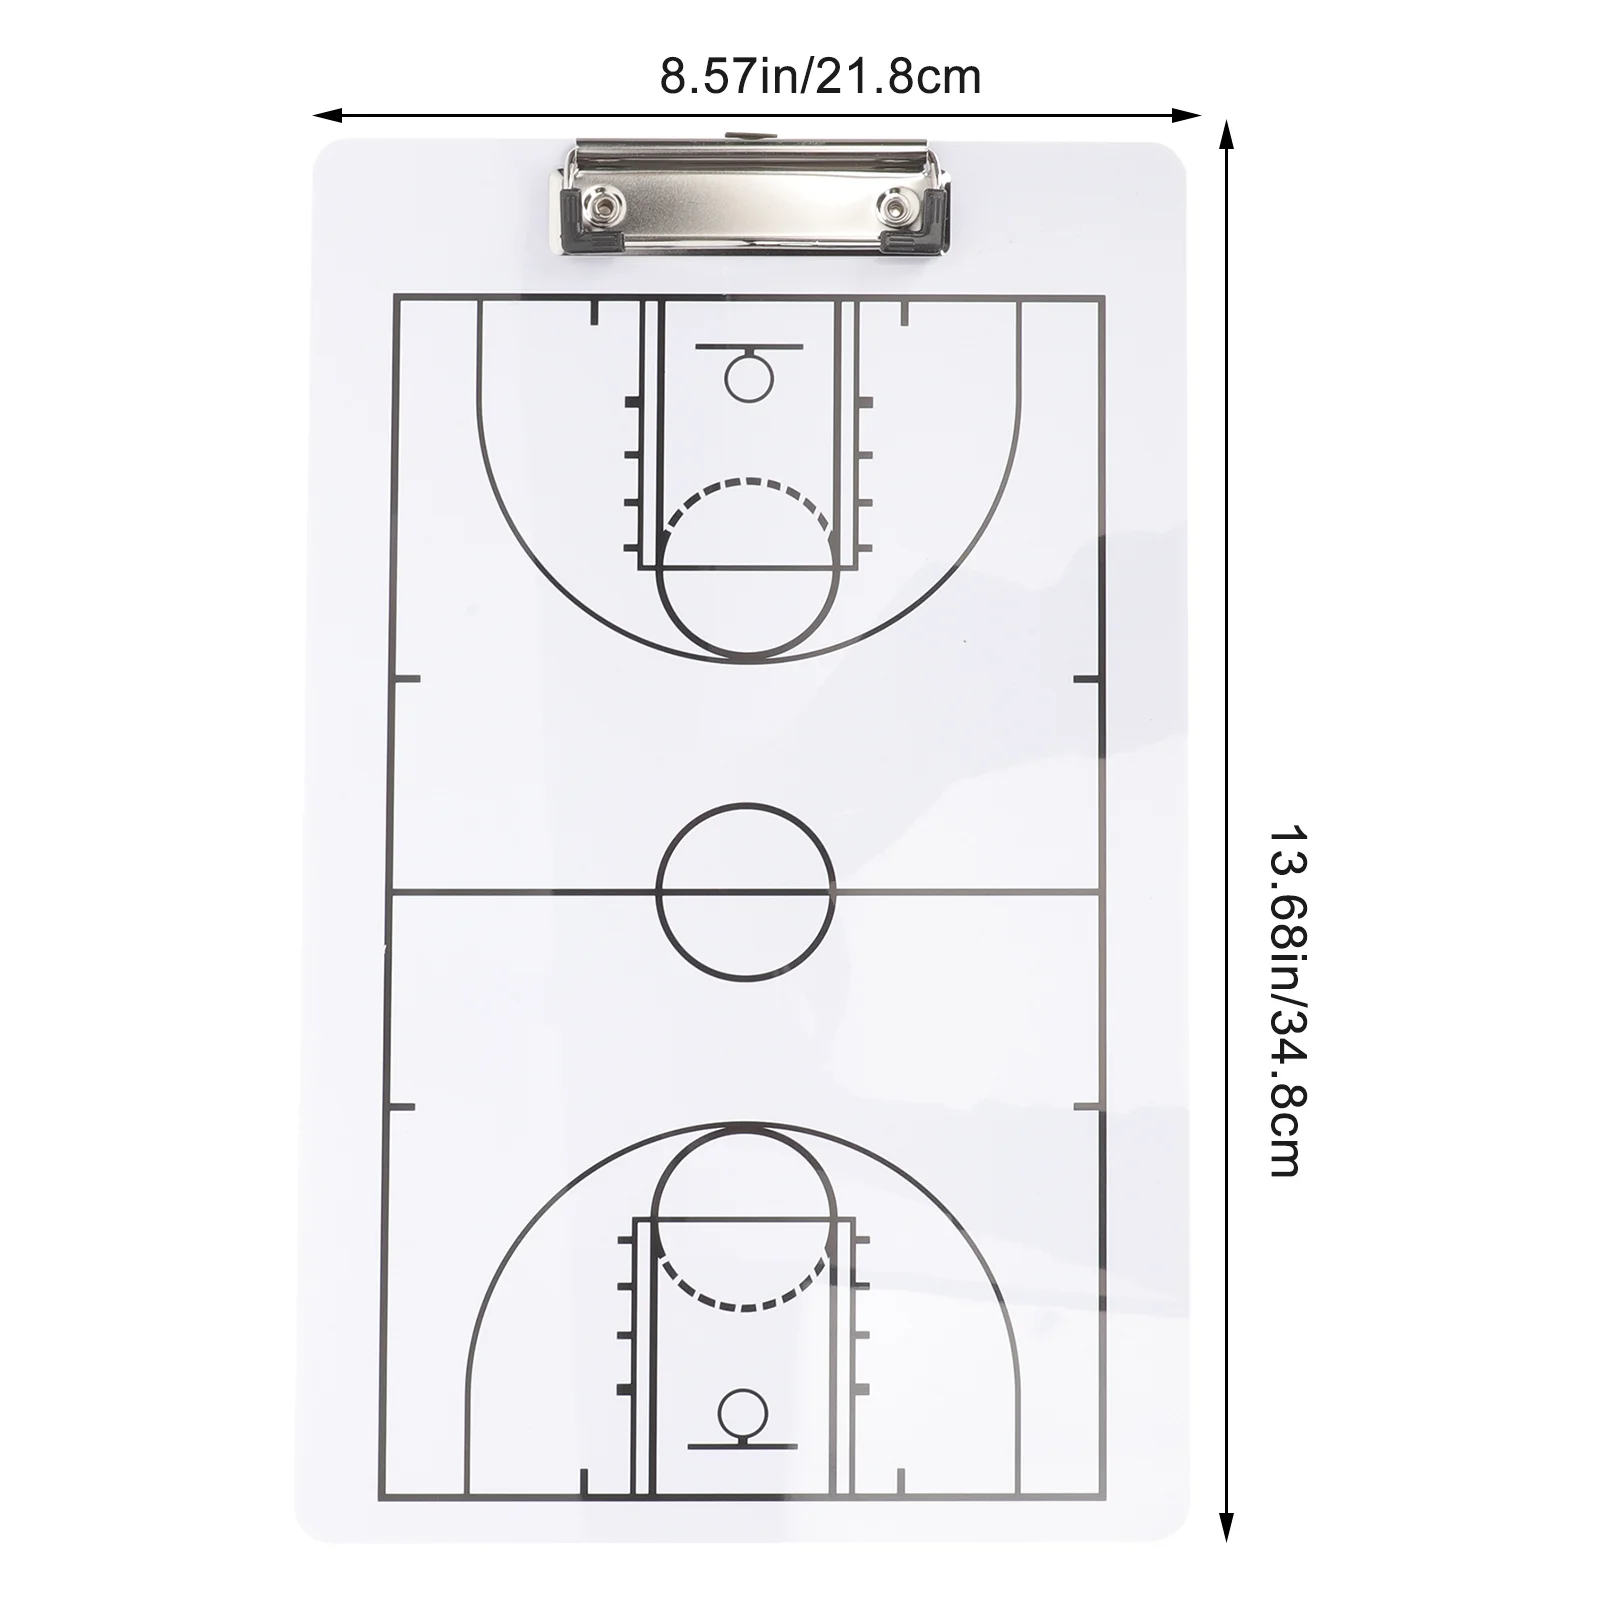 

Basketball Board Whiteboard Magnetic Planning Competition Creative Match Tactics Training Pvc